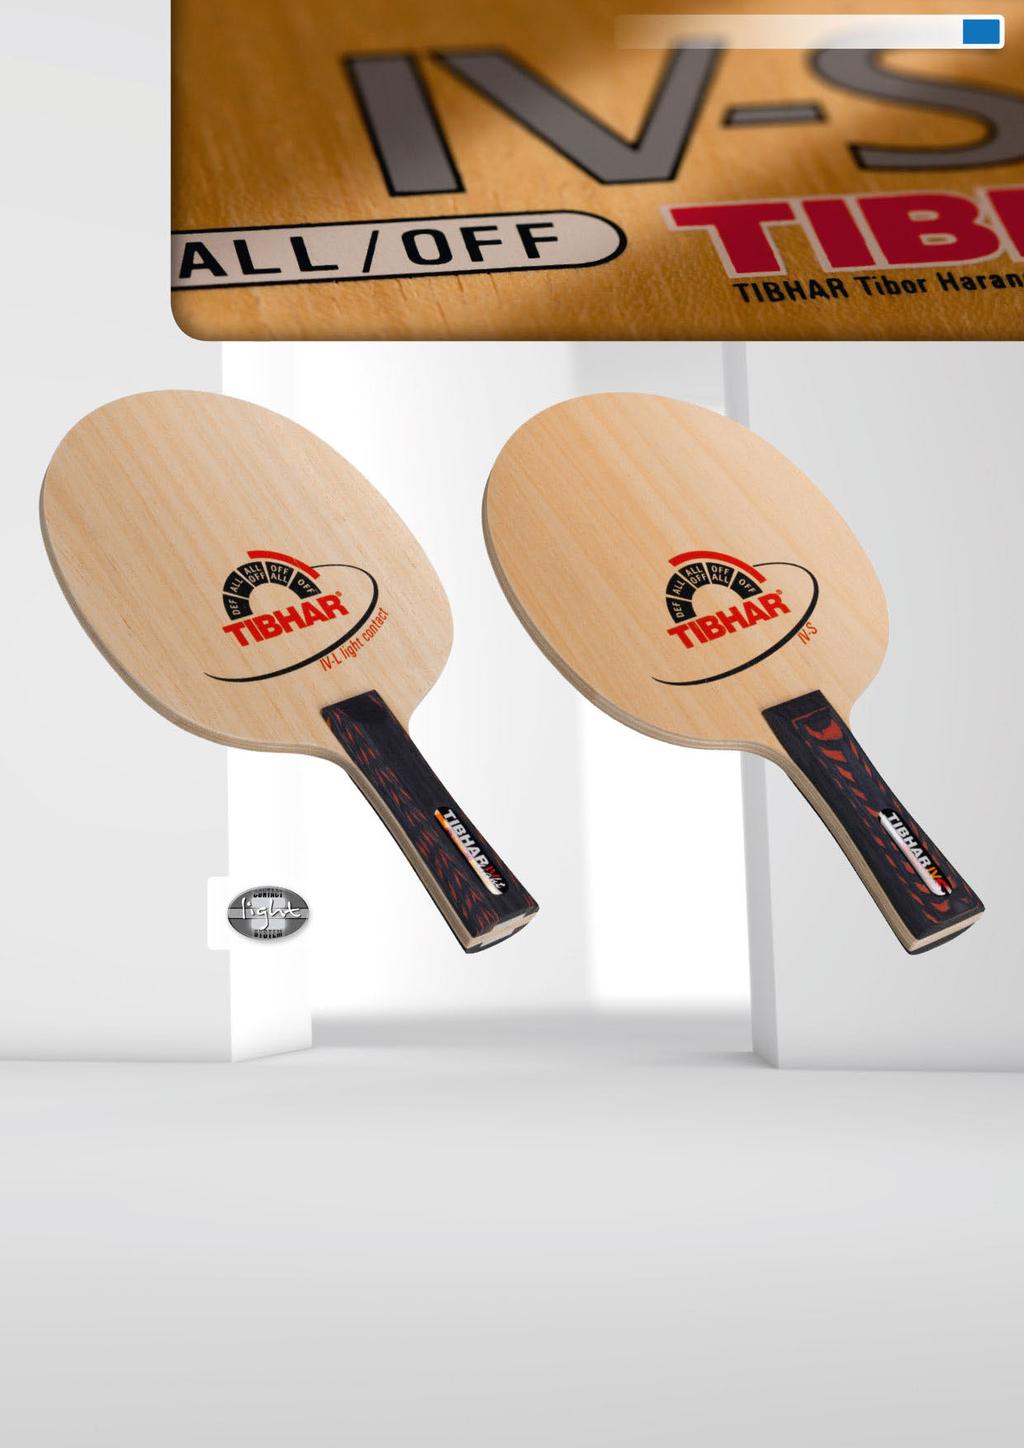 IV SERIES 35 IV-L LIGHT CONTACT This TIBHAR allround classic presents itself as an ALL/ OFF blade due to the applied Contact light System. It is lighter although it has a bigger racket shape.